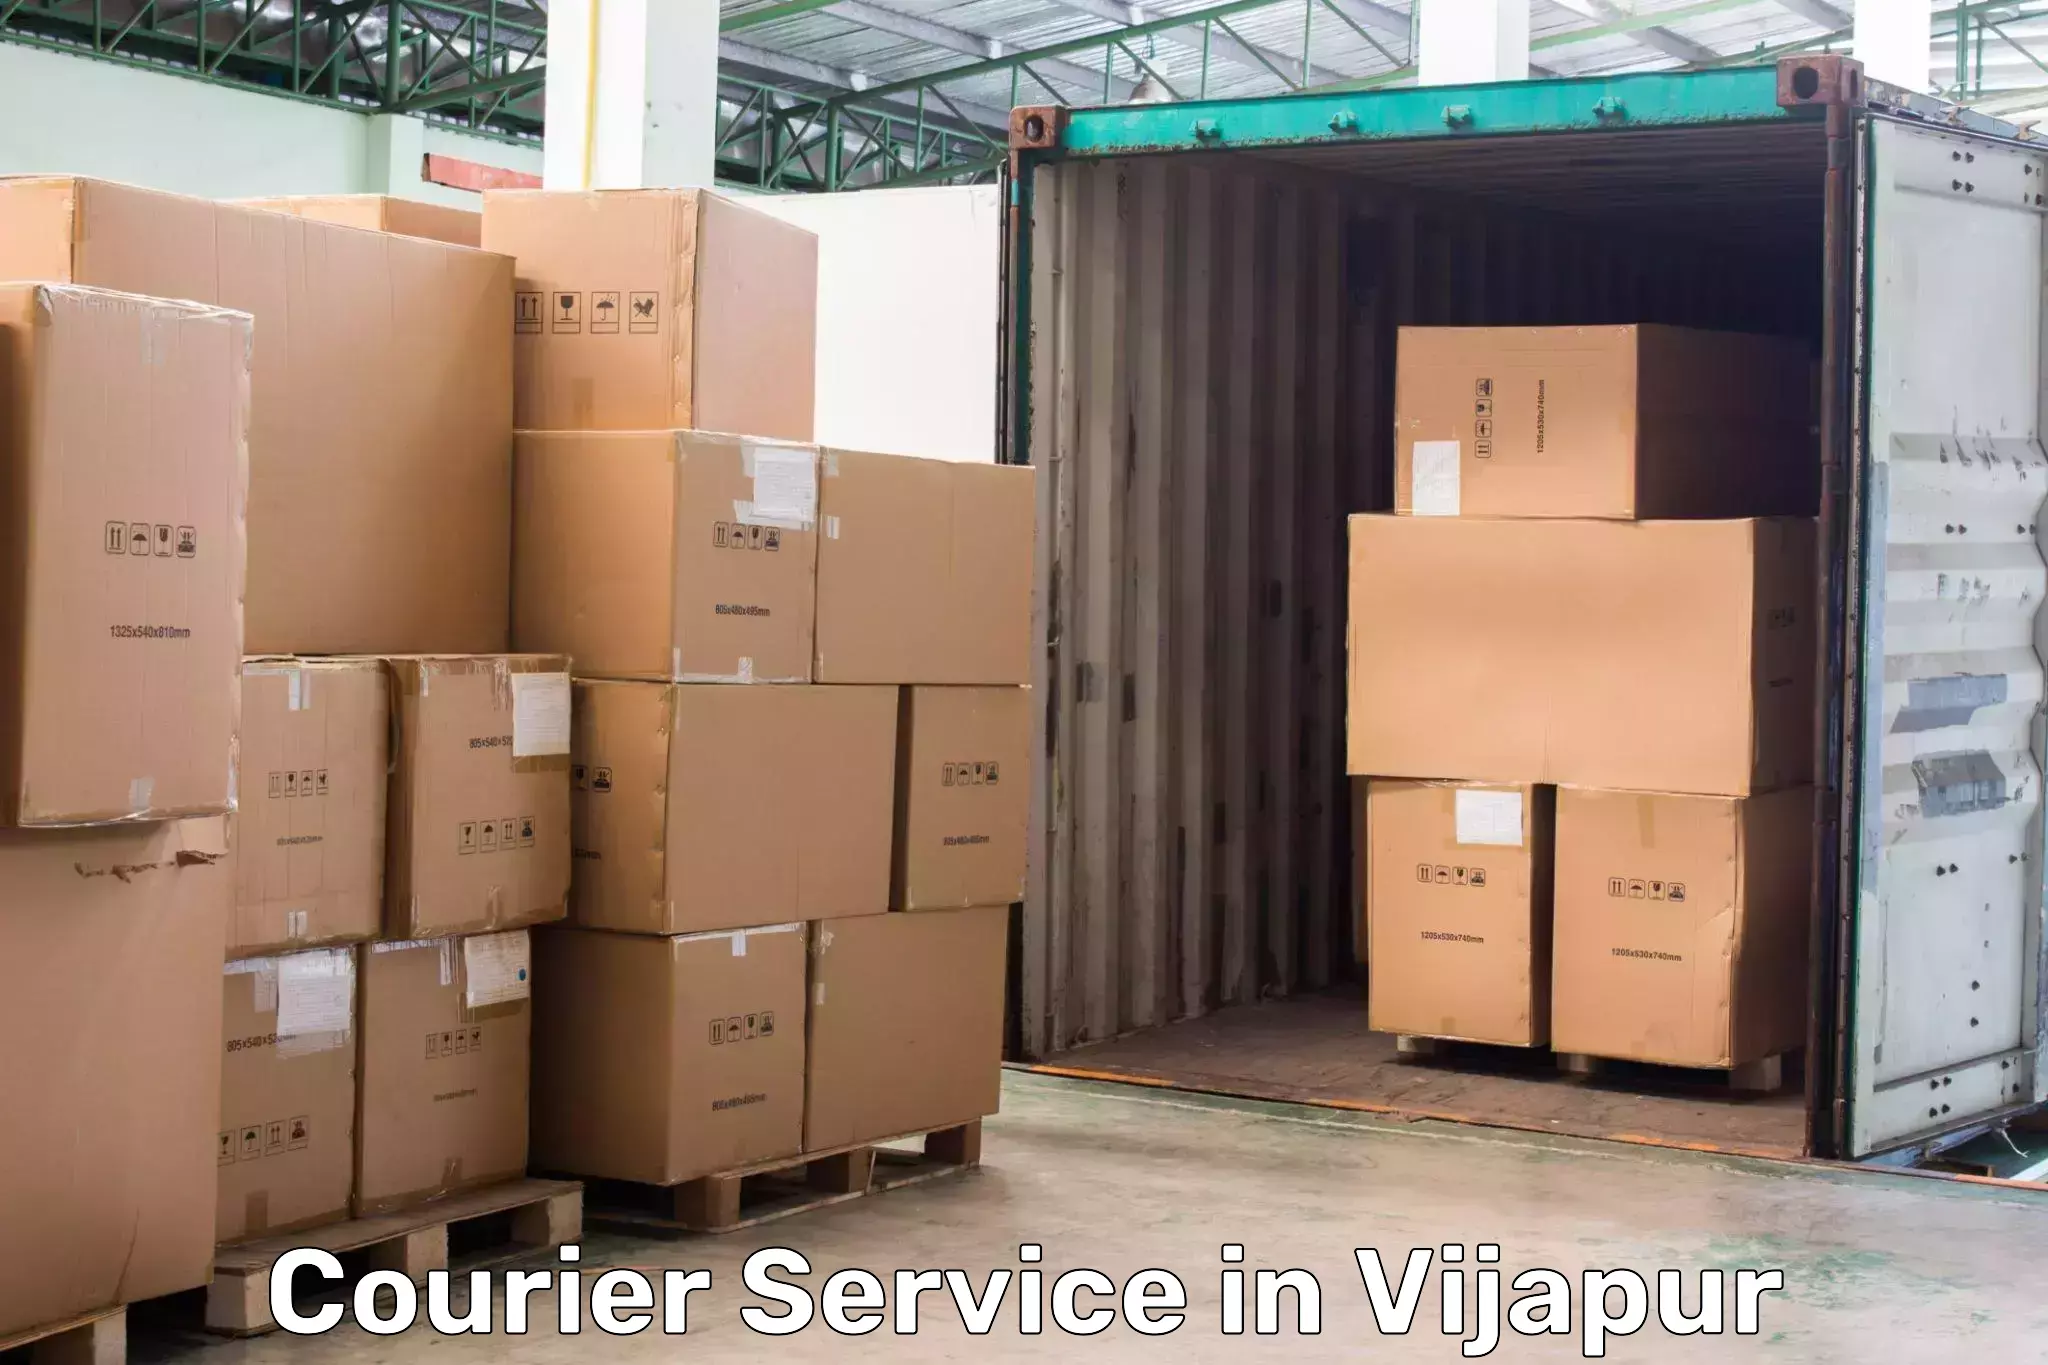 Parcel handling and care in Vijapur